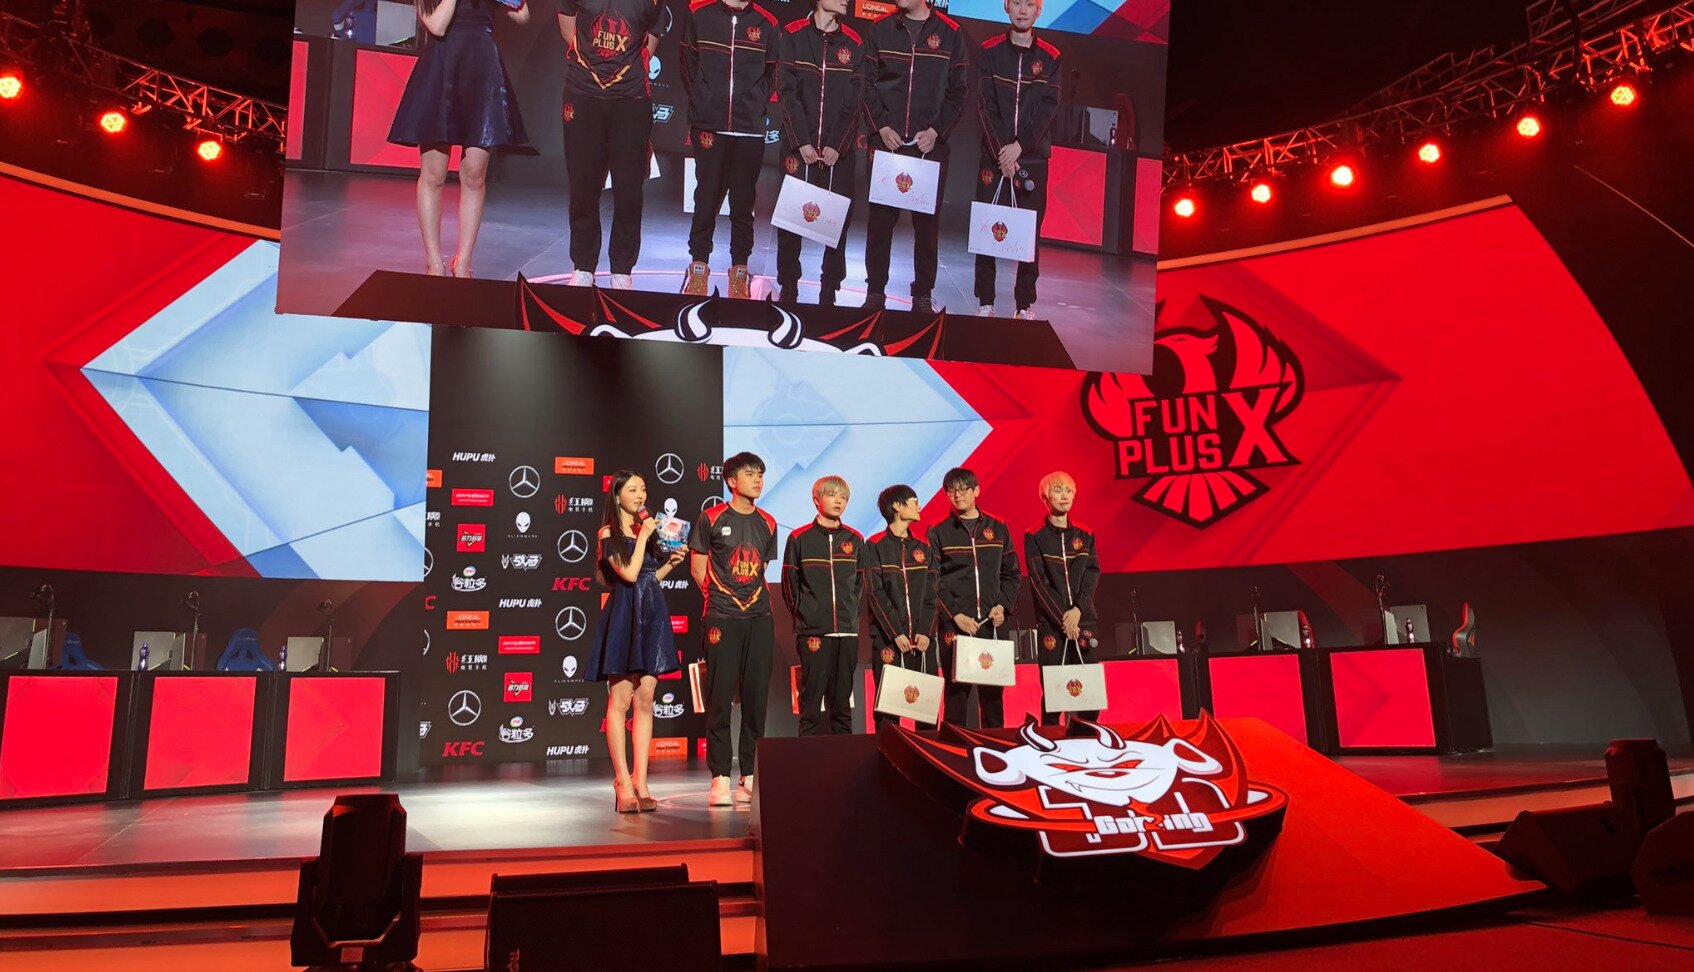 We look back at the match results, top storylines, best plays, and standout individual performances from the past week in the LPL.